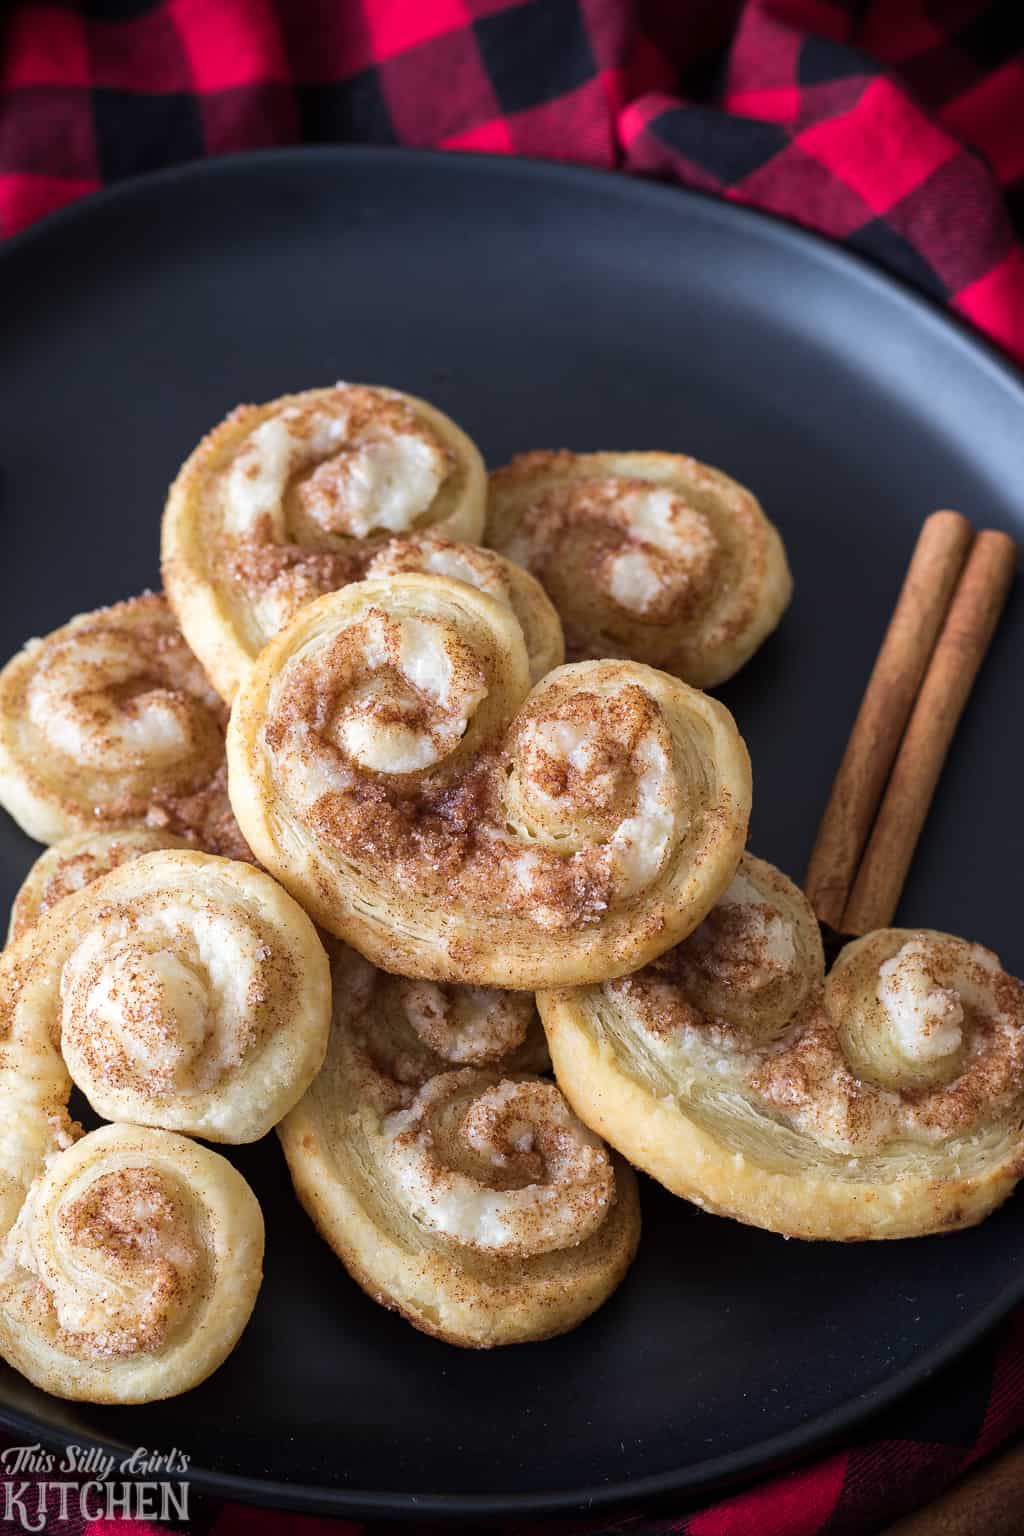 Cinnamon Cream Cheese Palmier Cookies, puff pastry, sweetened cream cheese, and cinnamon sugar baked to golden brown deliciousness! #Recipe from ThisSillyGirlsKitchen.com #christmascookies #cinnamon #creamcheese #palmier #cookies